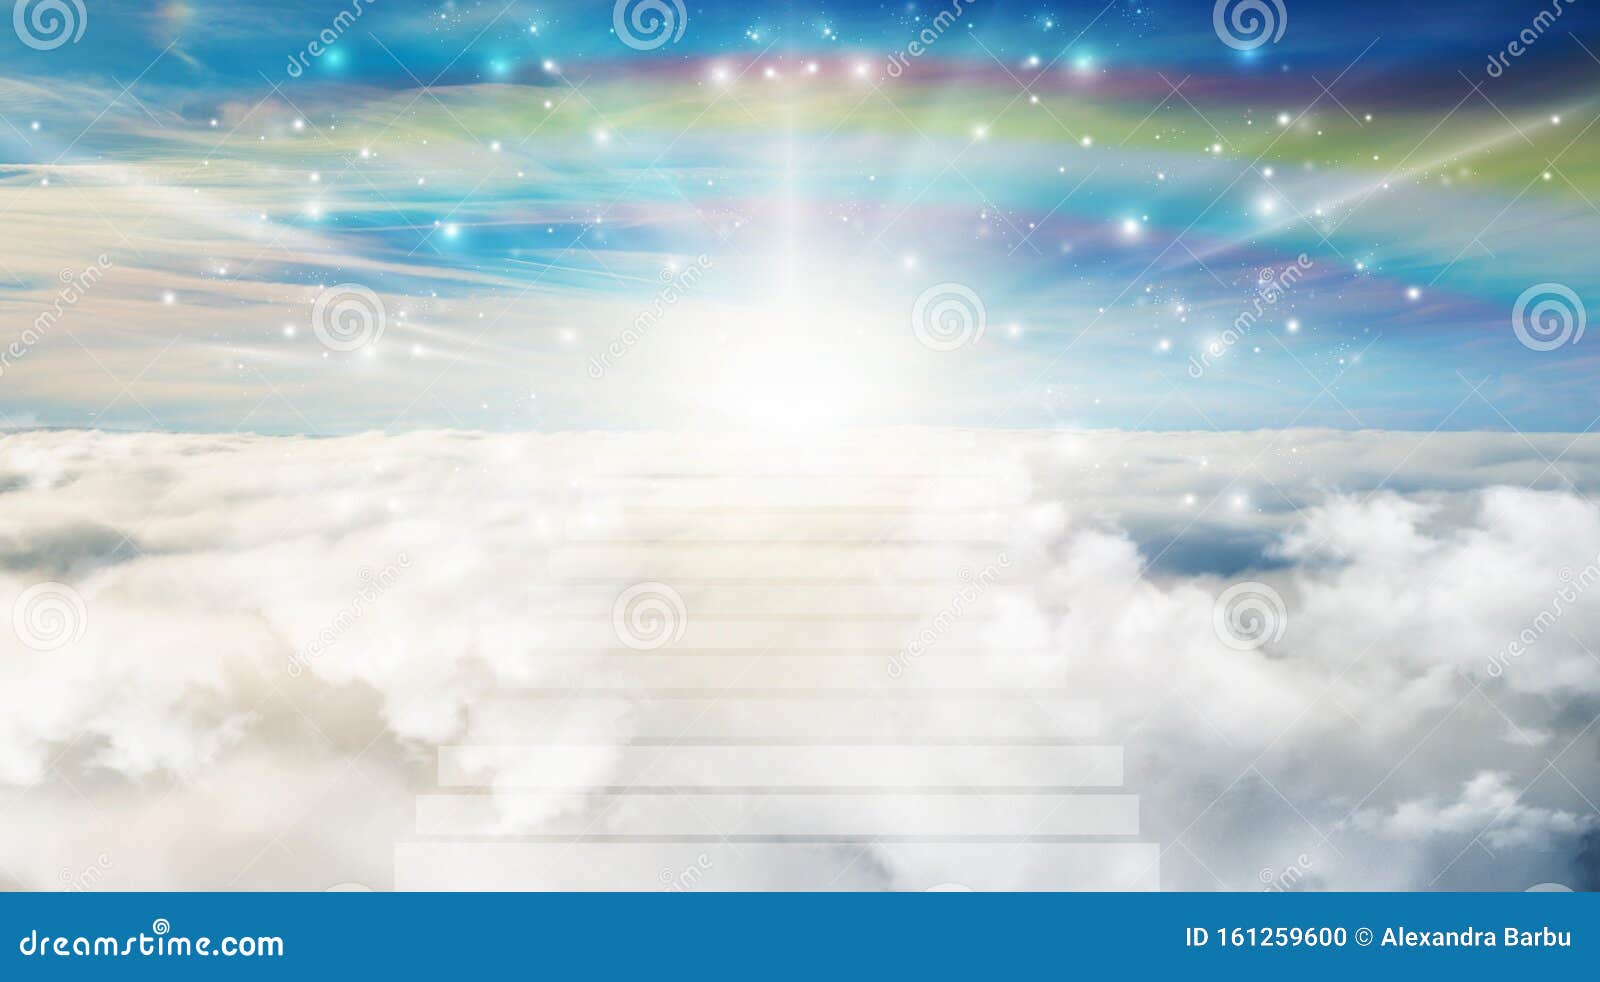 stairway to heaven, above clouds, soul journey to the light, heavenly sky, path to god